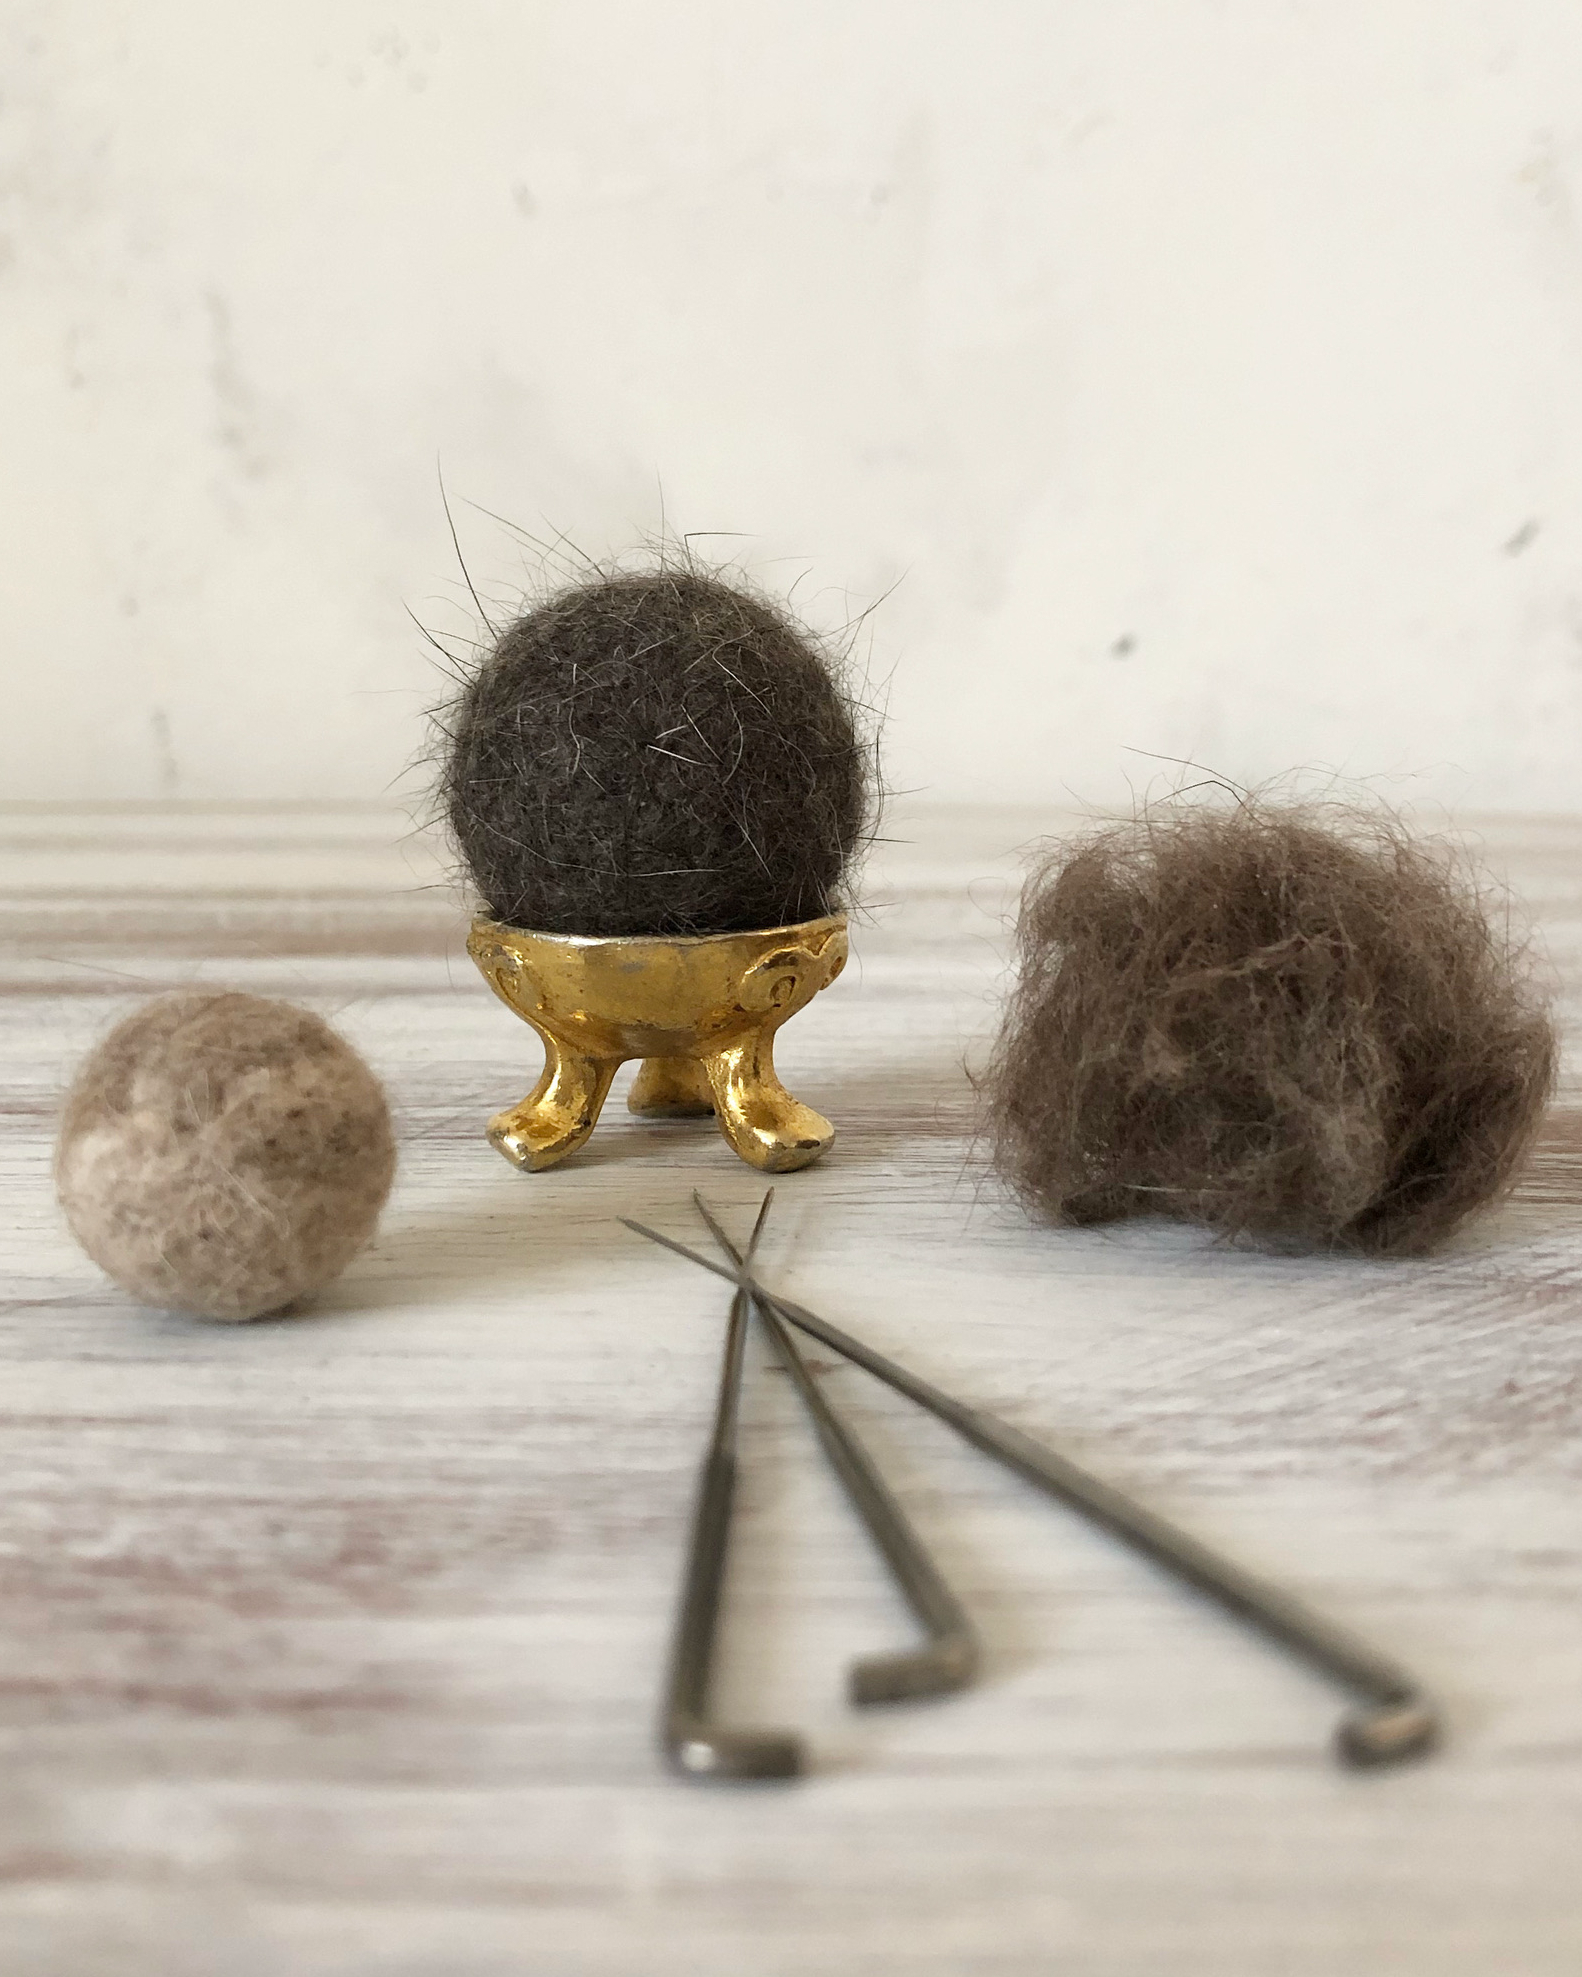 Three felted hair balls with needles in the foreground